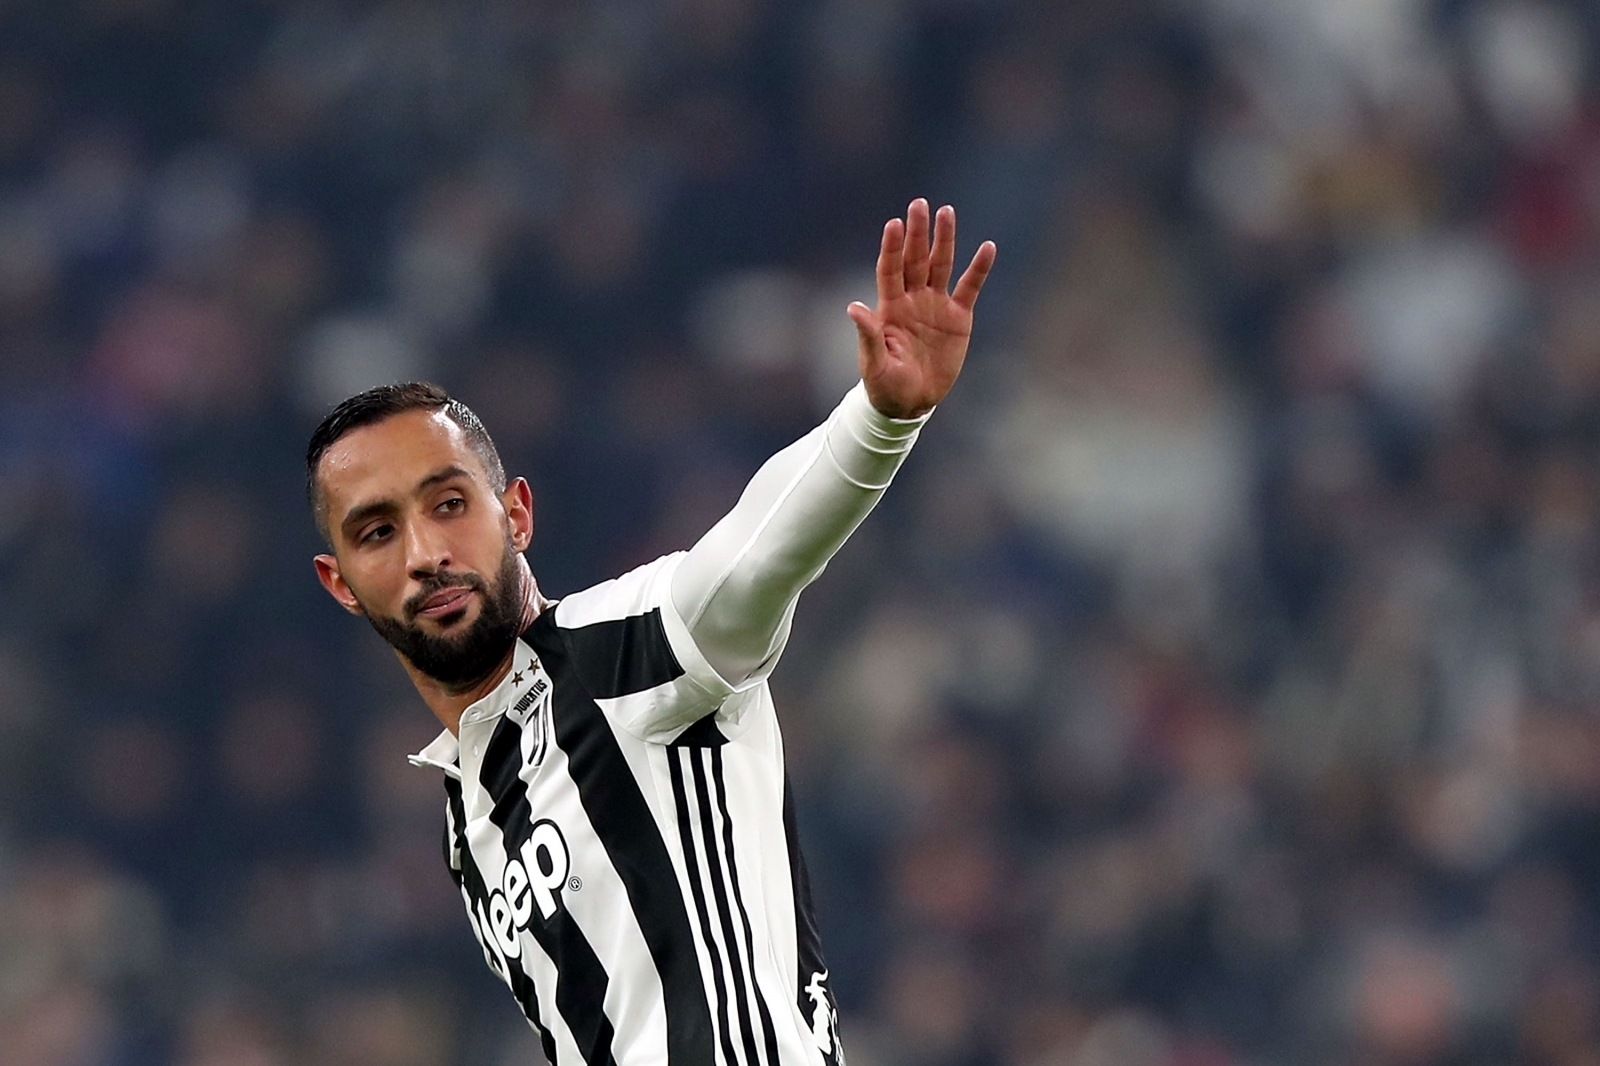 Juventus reject Arsenal's £35m offer to sign Moroccan defender Mehdi Benatia in January1600 x 1066